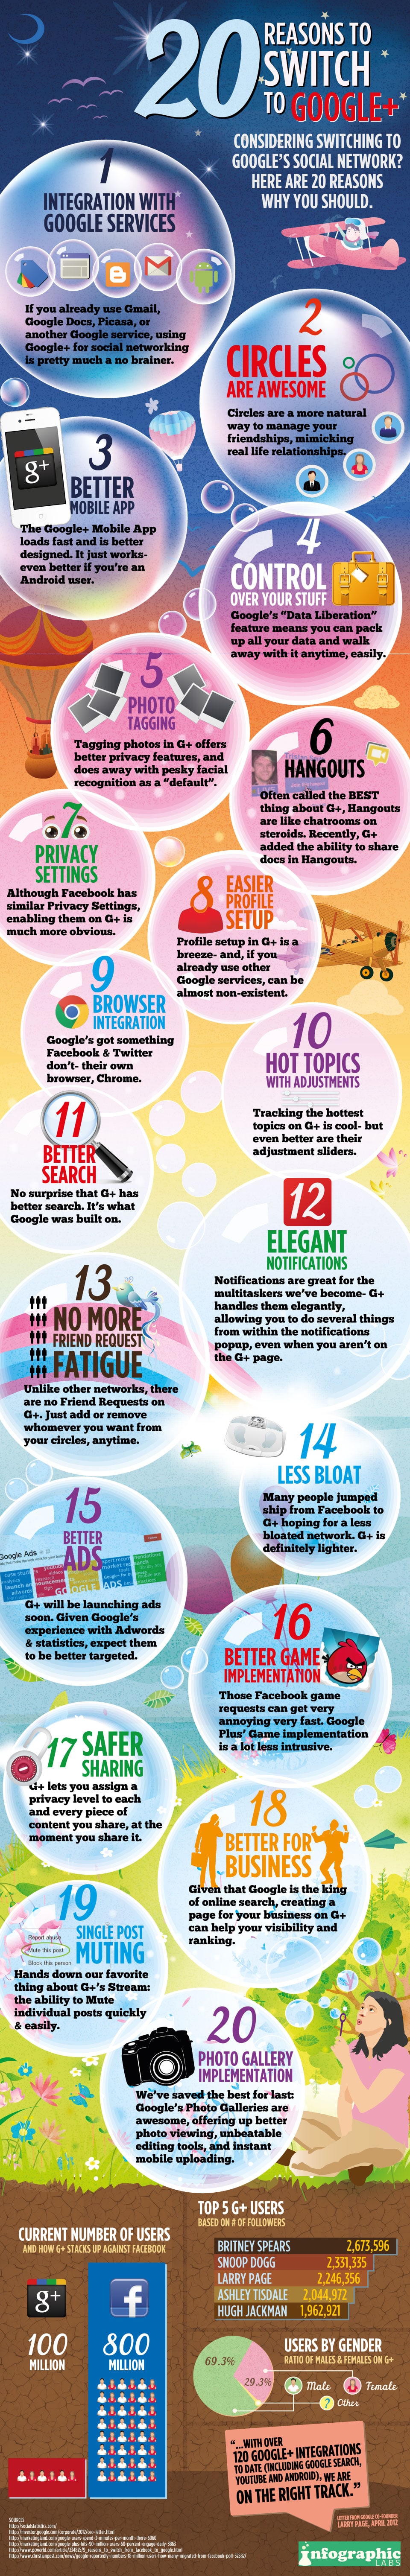 20 Reasons To Switch To Google+ [Infographic]